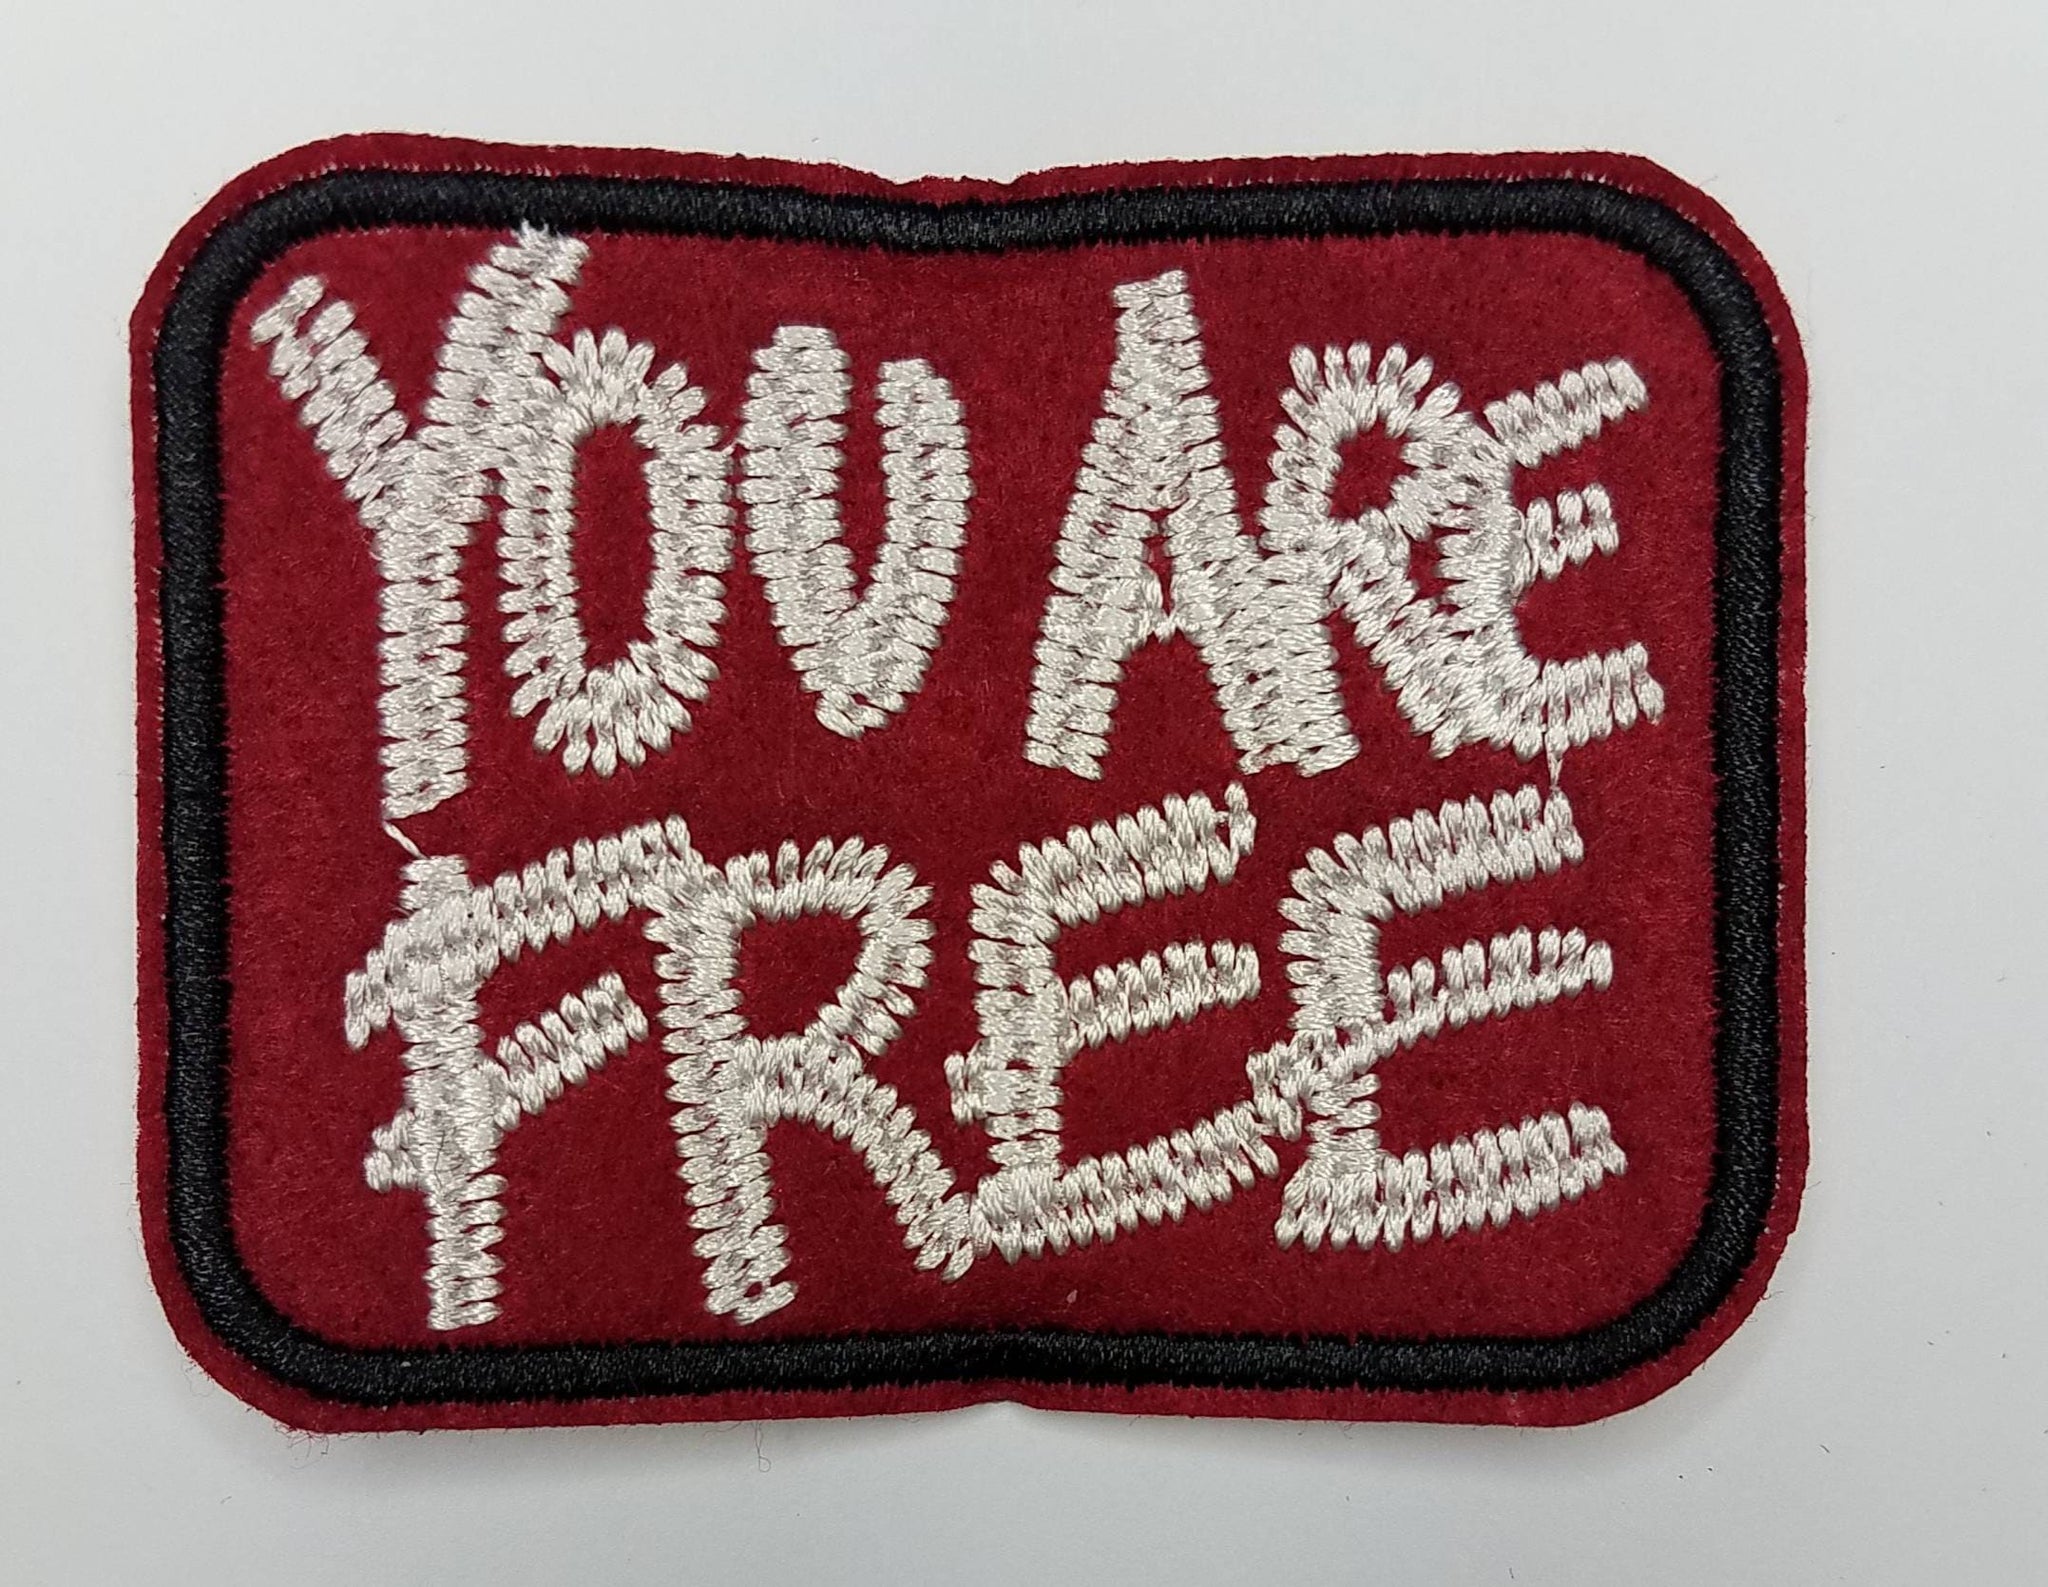 Motivational, "You are Free", Red, Black and White, Patch, Size 3", Patch DIY, Embroidered Applique Iron On Patches